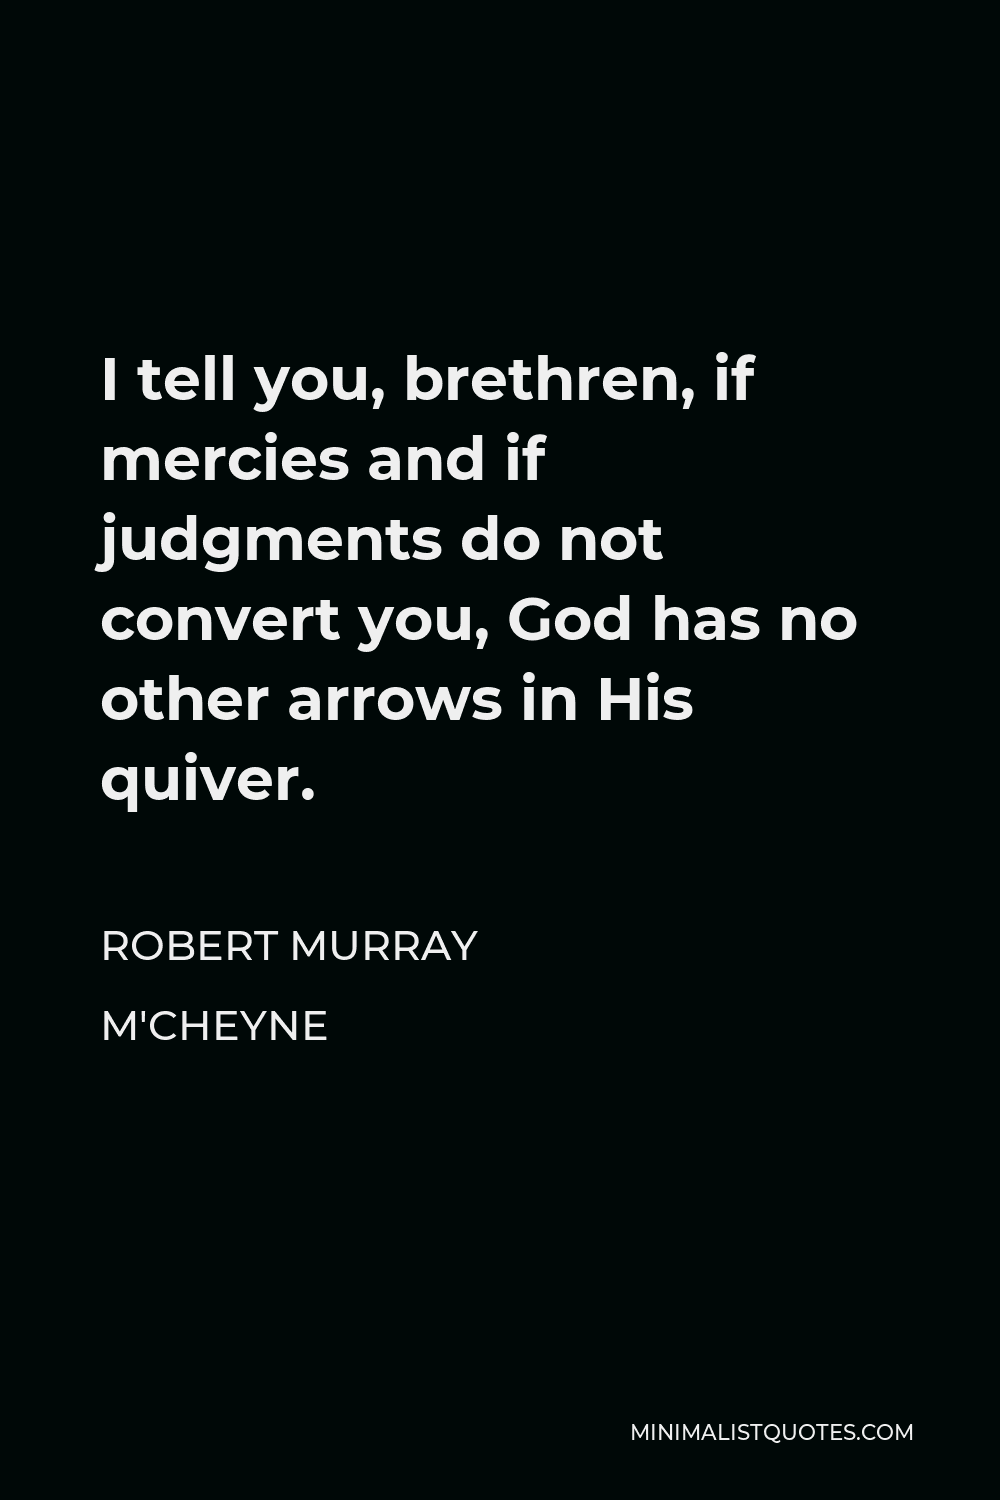 Robert Murray M'Cheyne Quote - I tell you, brethren, if mercies and if judgments do not convert you, God has no other arrows in His quiver.